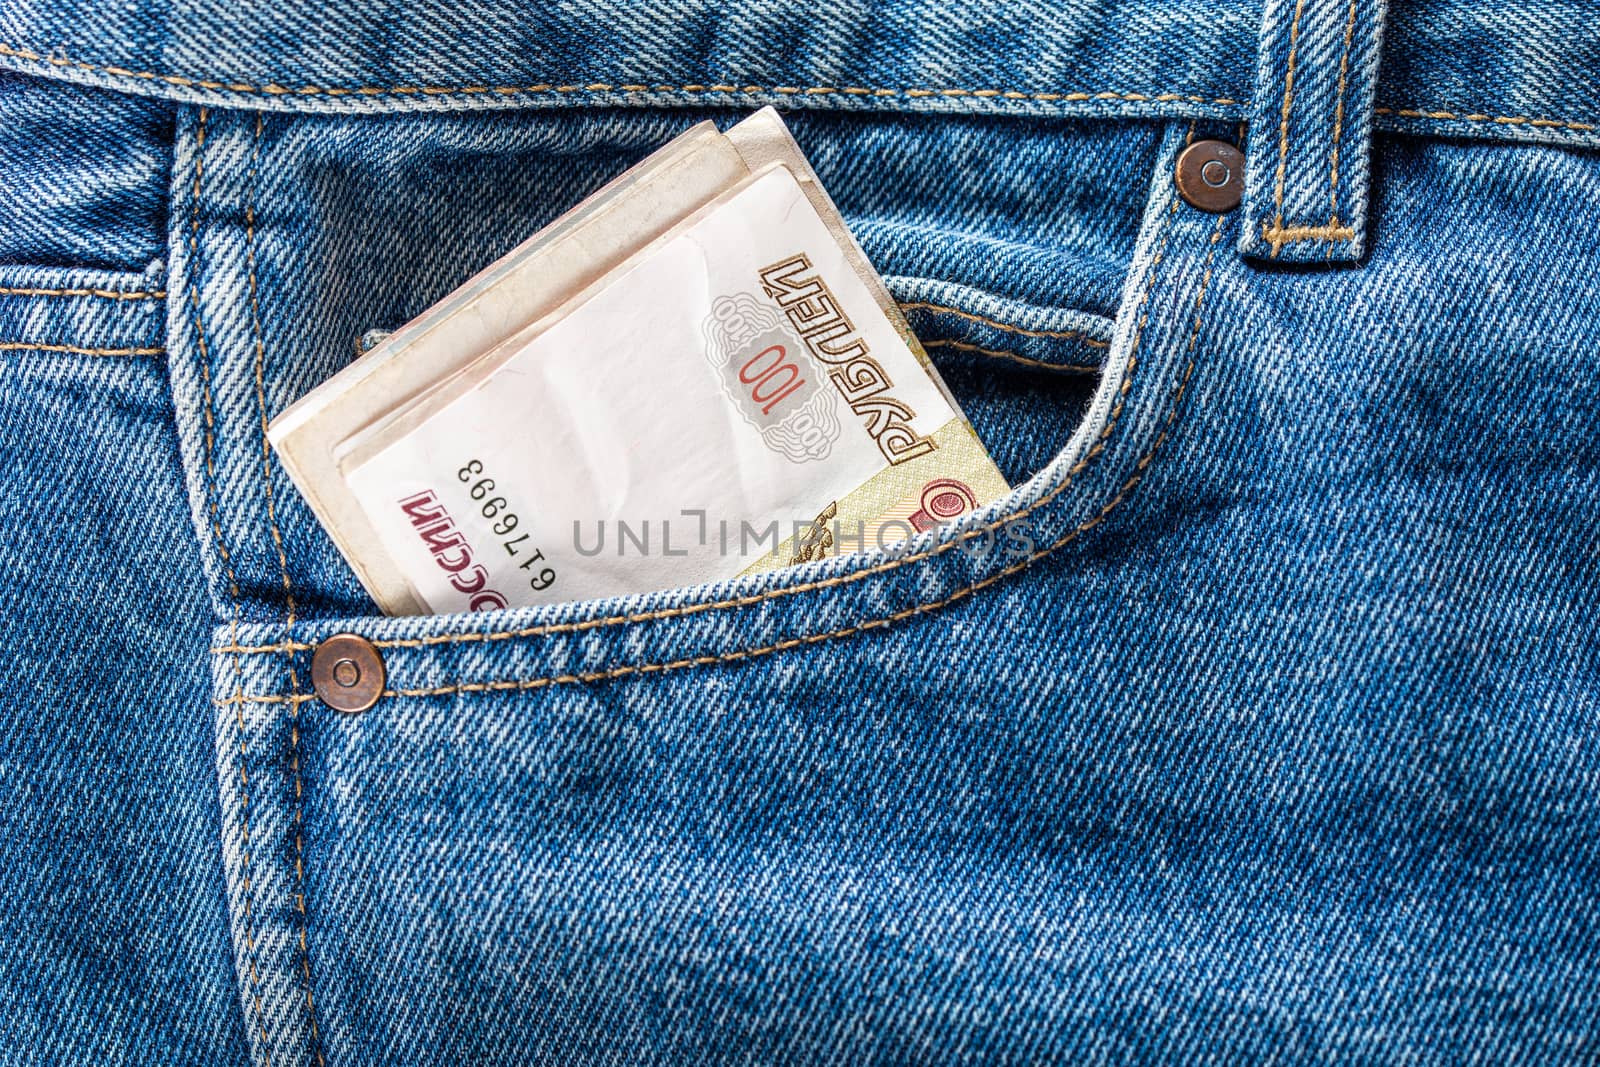 russian ruble banknotes in the front left pocket of blue jeans. Concept of saving money or pocket expenses by z1b